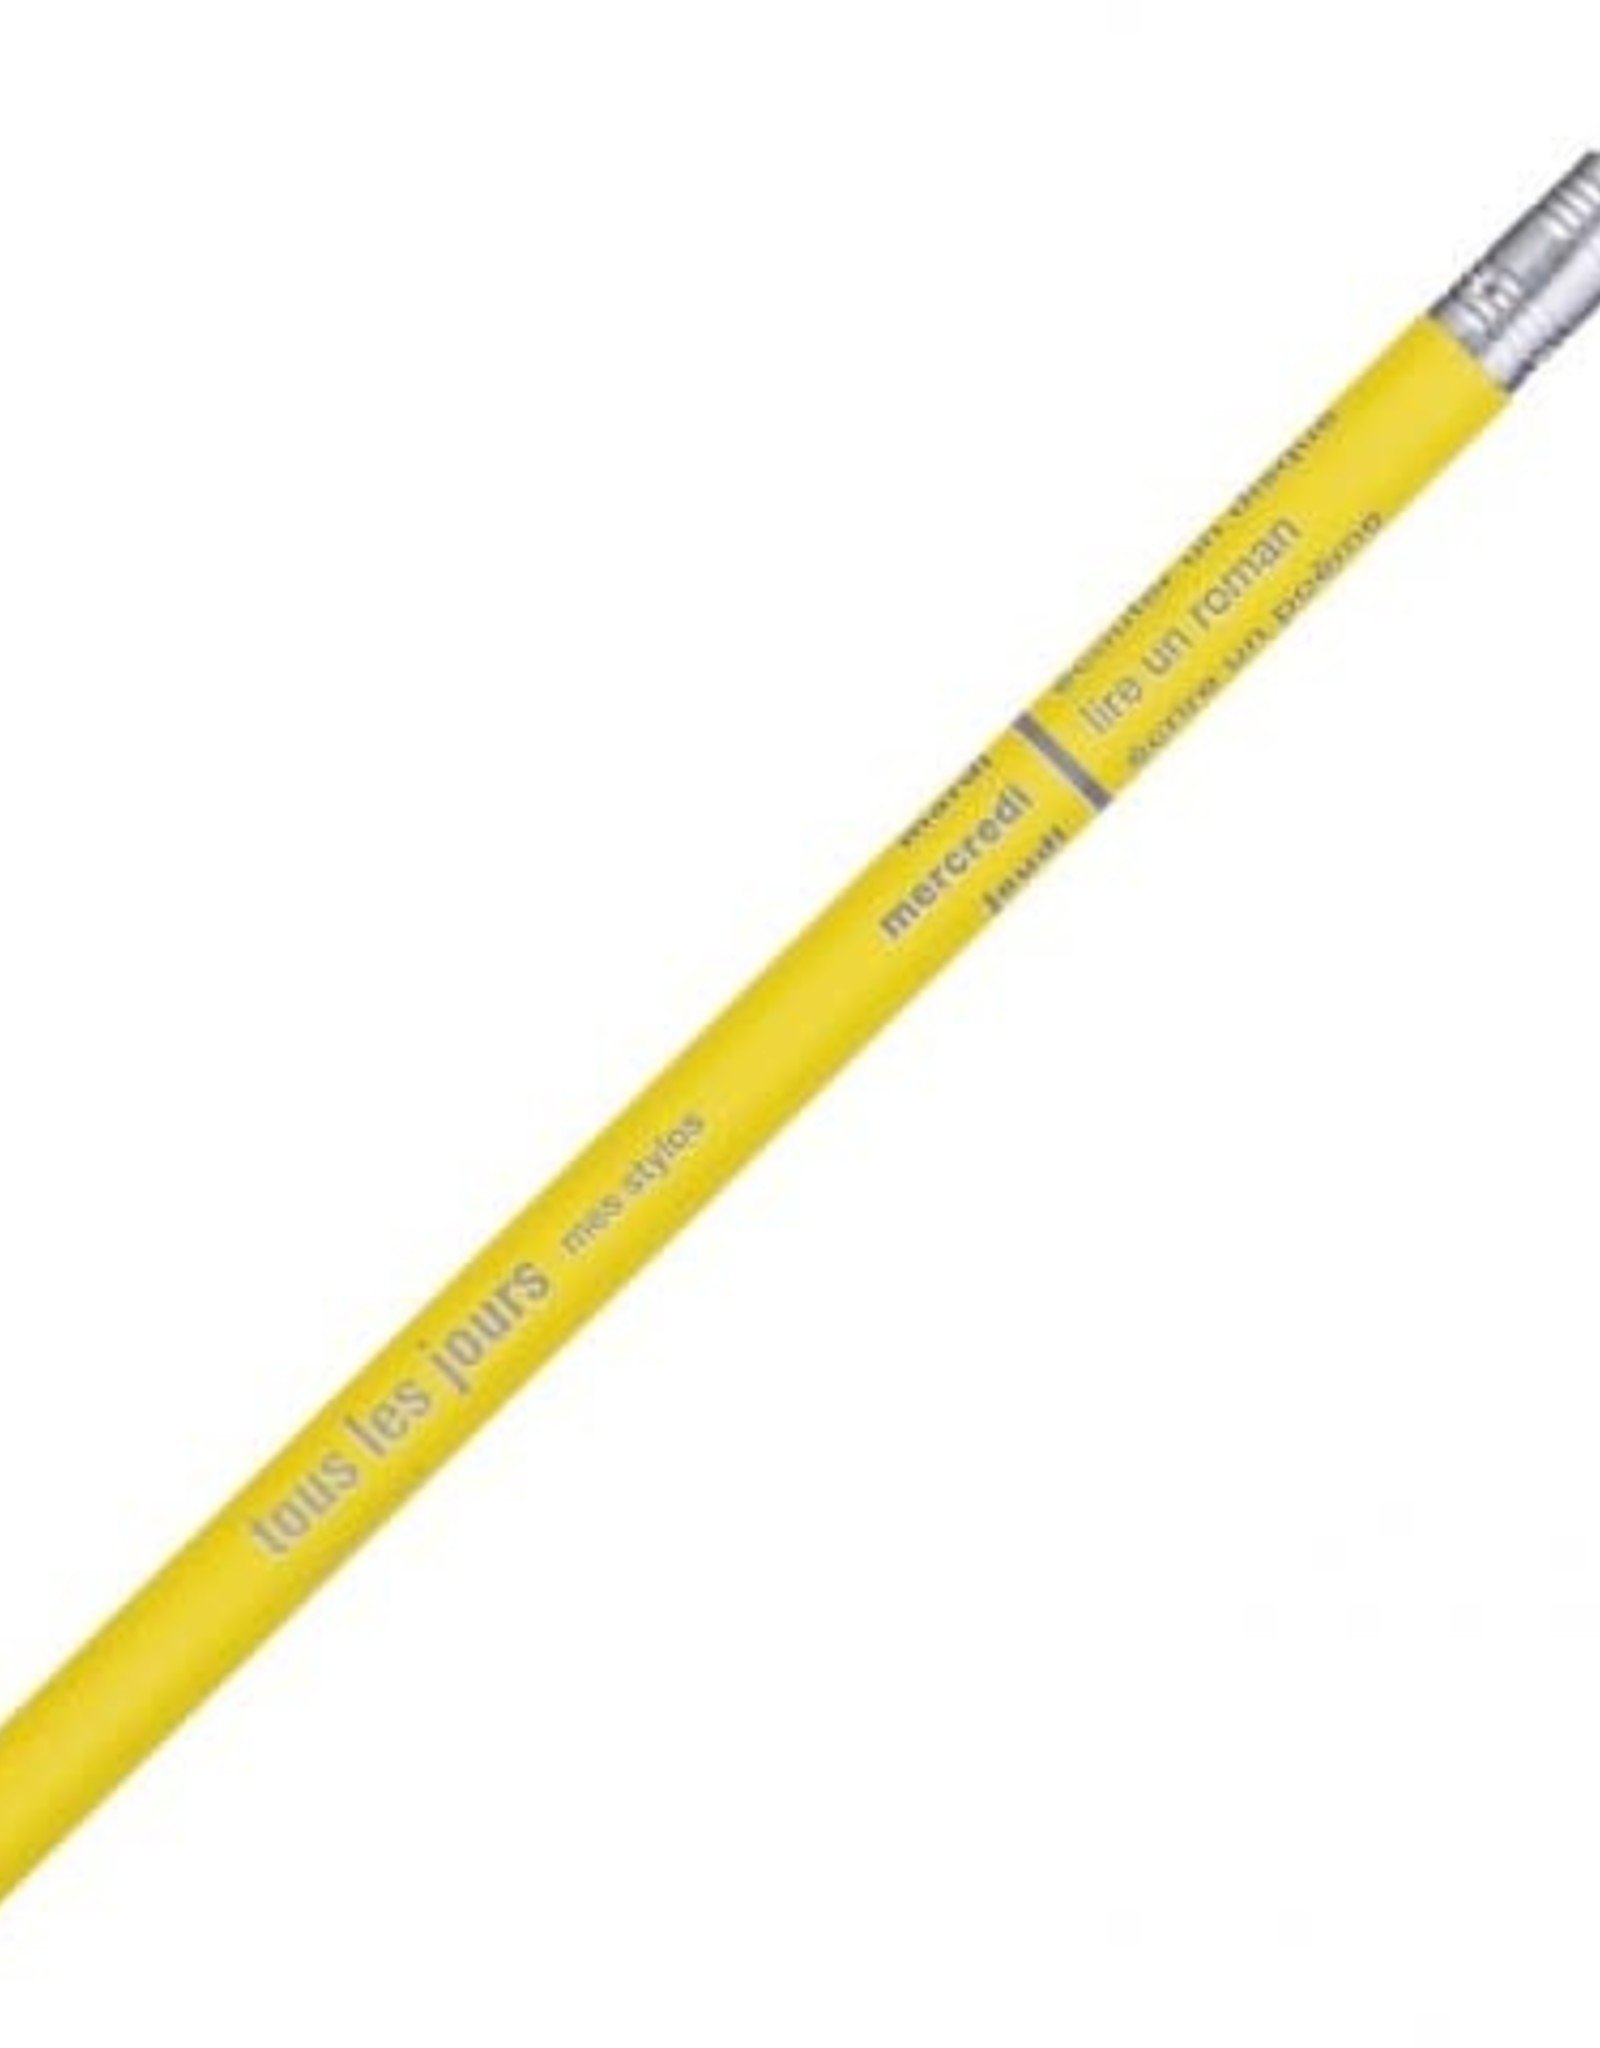 Marks Mark'Style, Mechanical Pencil 0.5MM